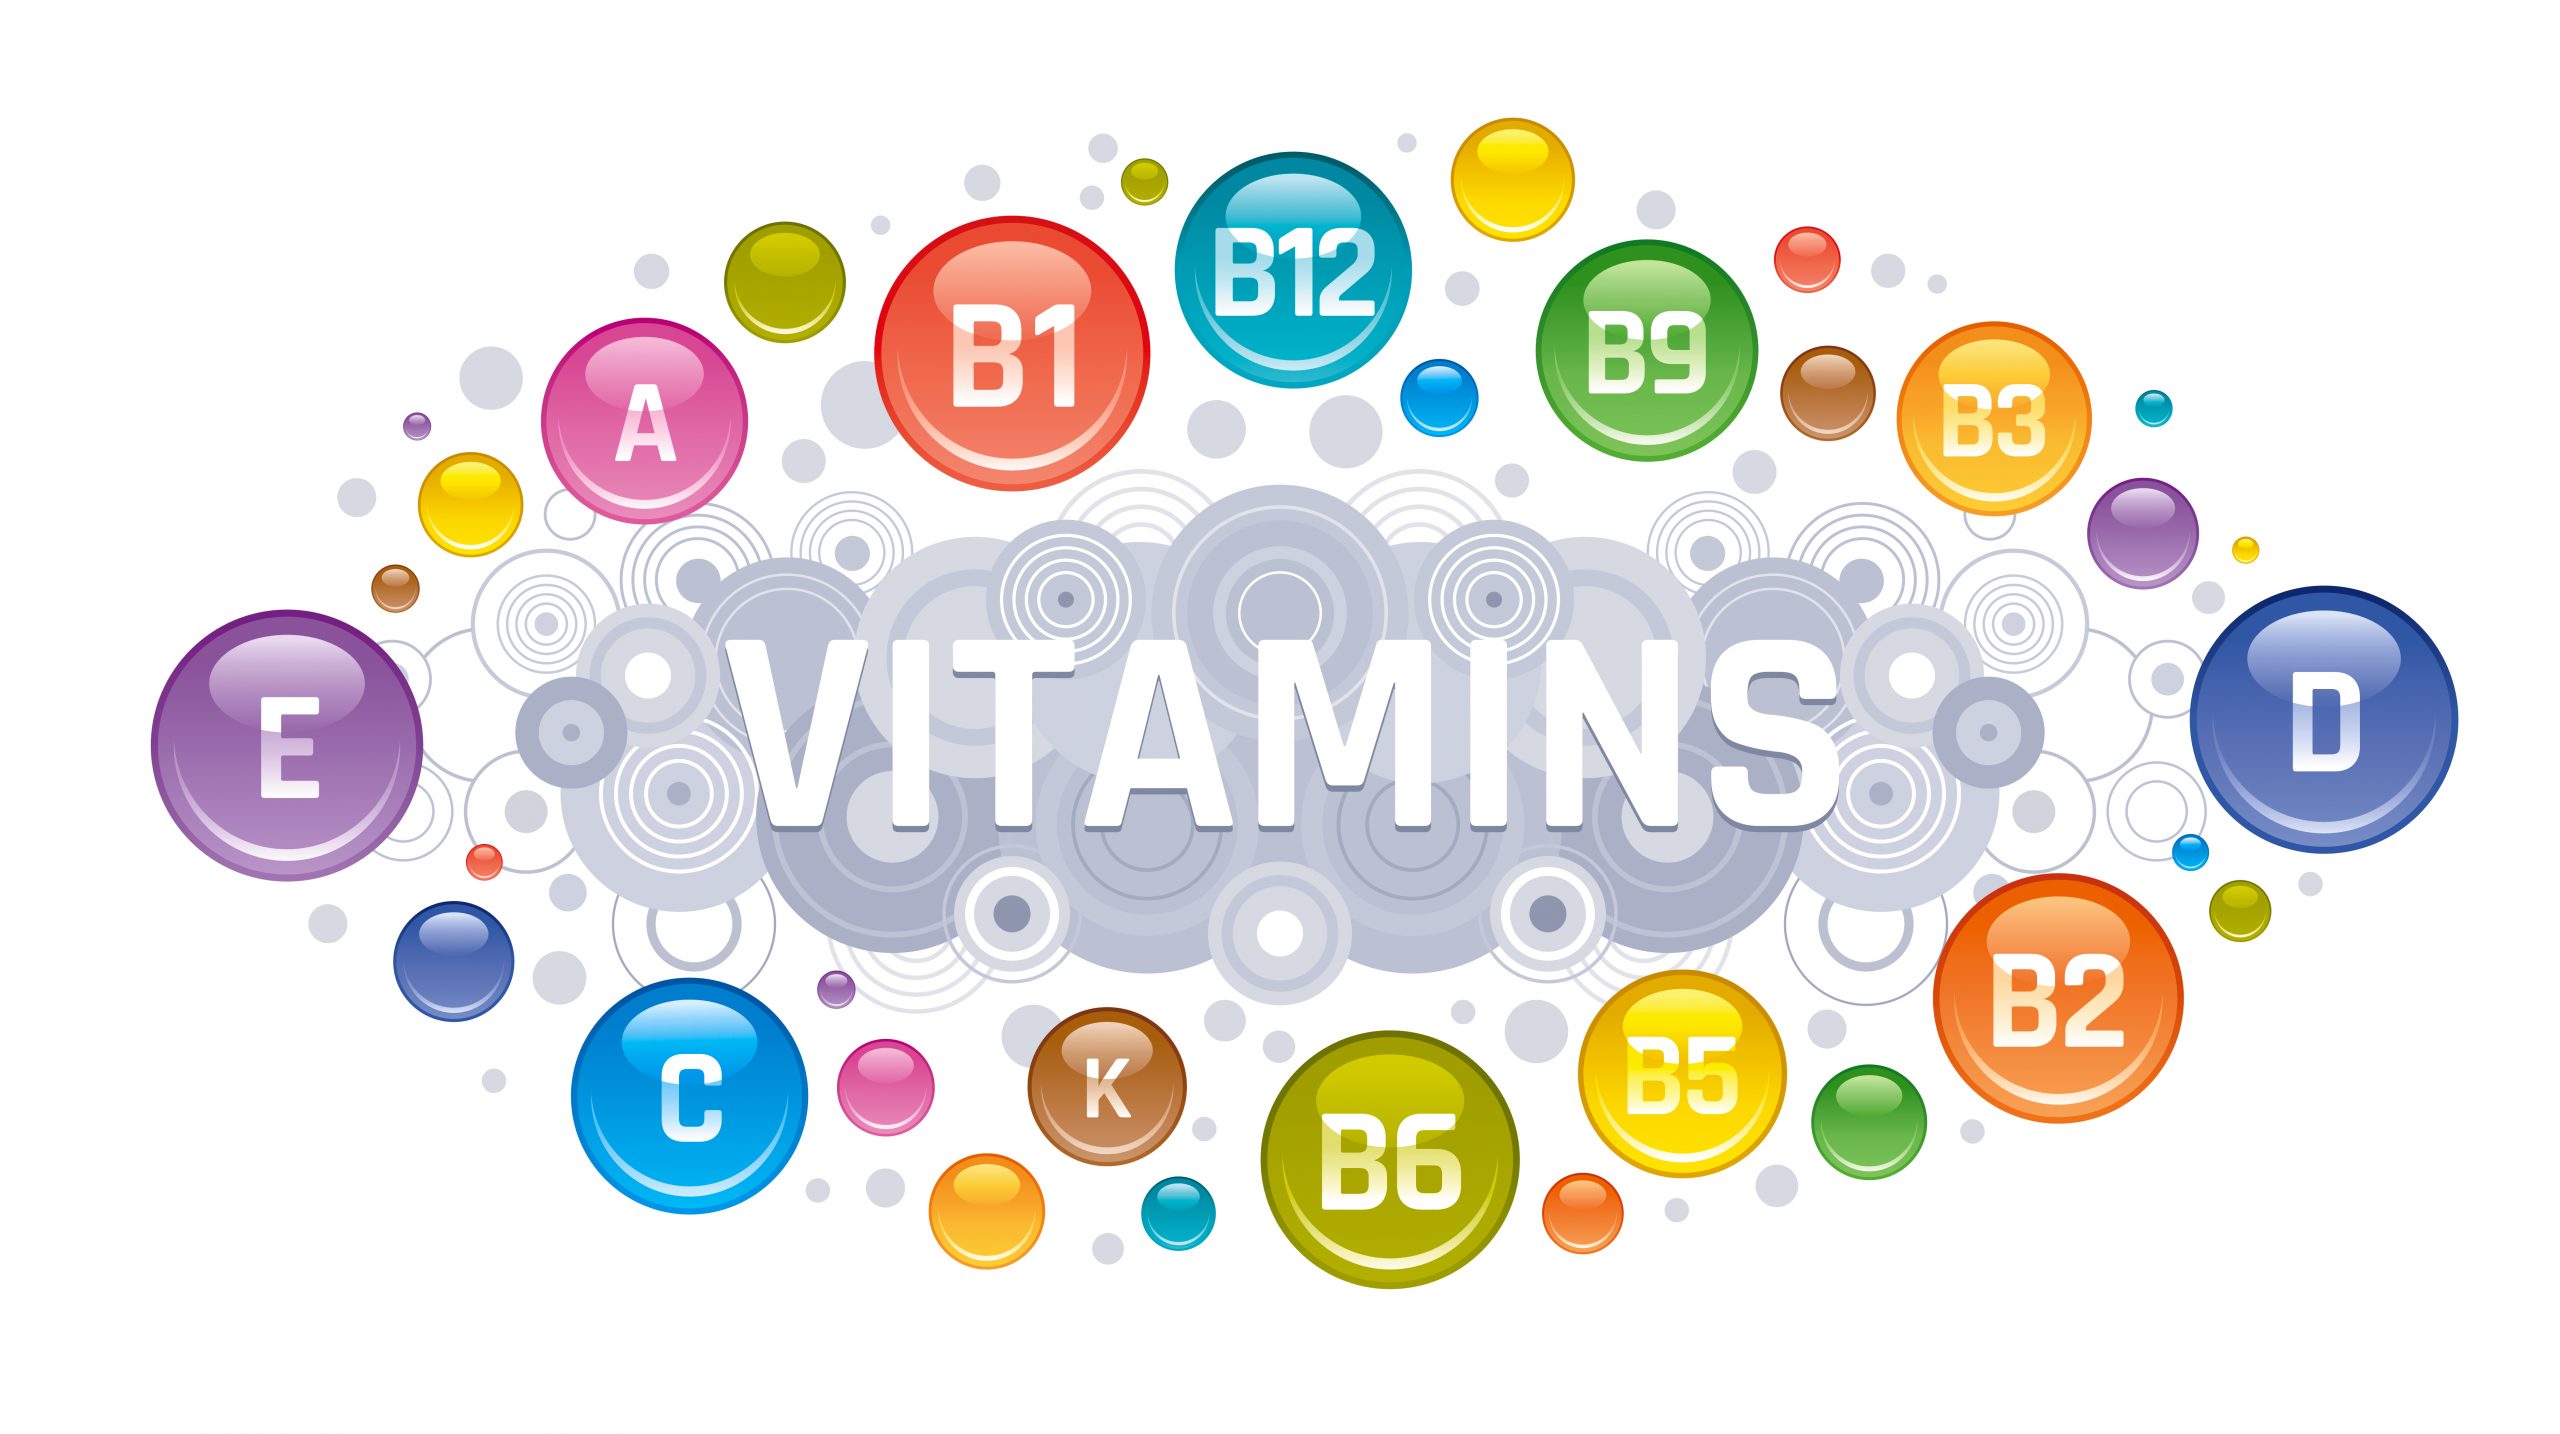 Word cloud showing all the vitamins